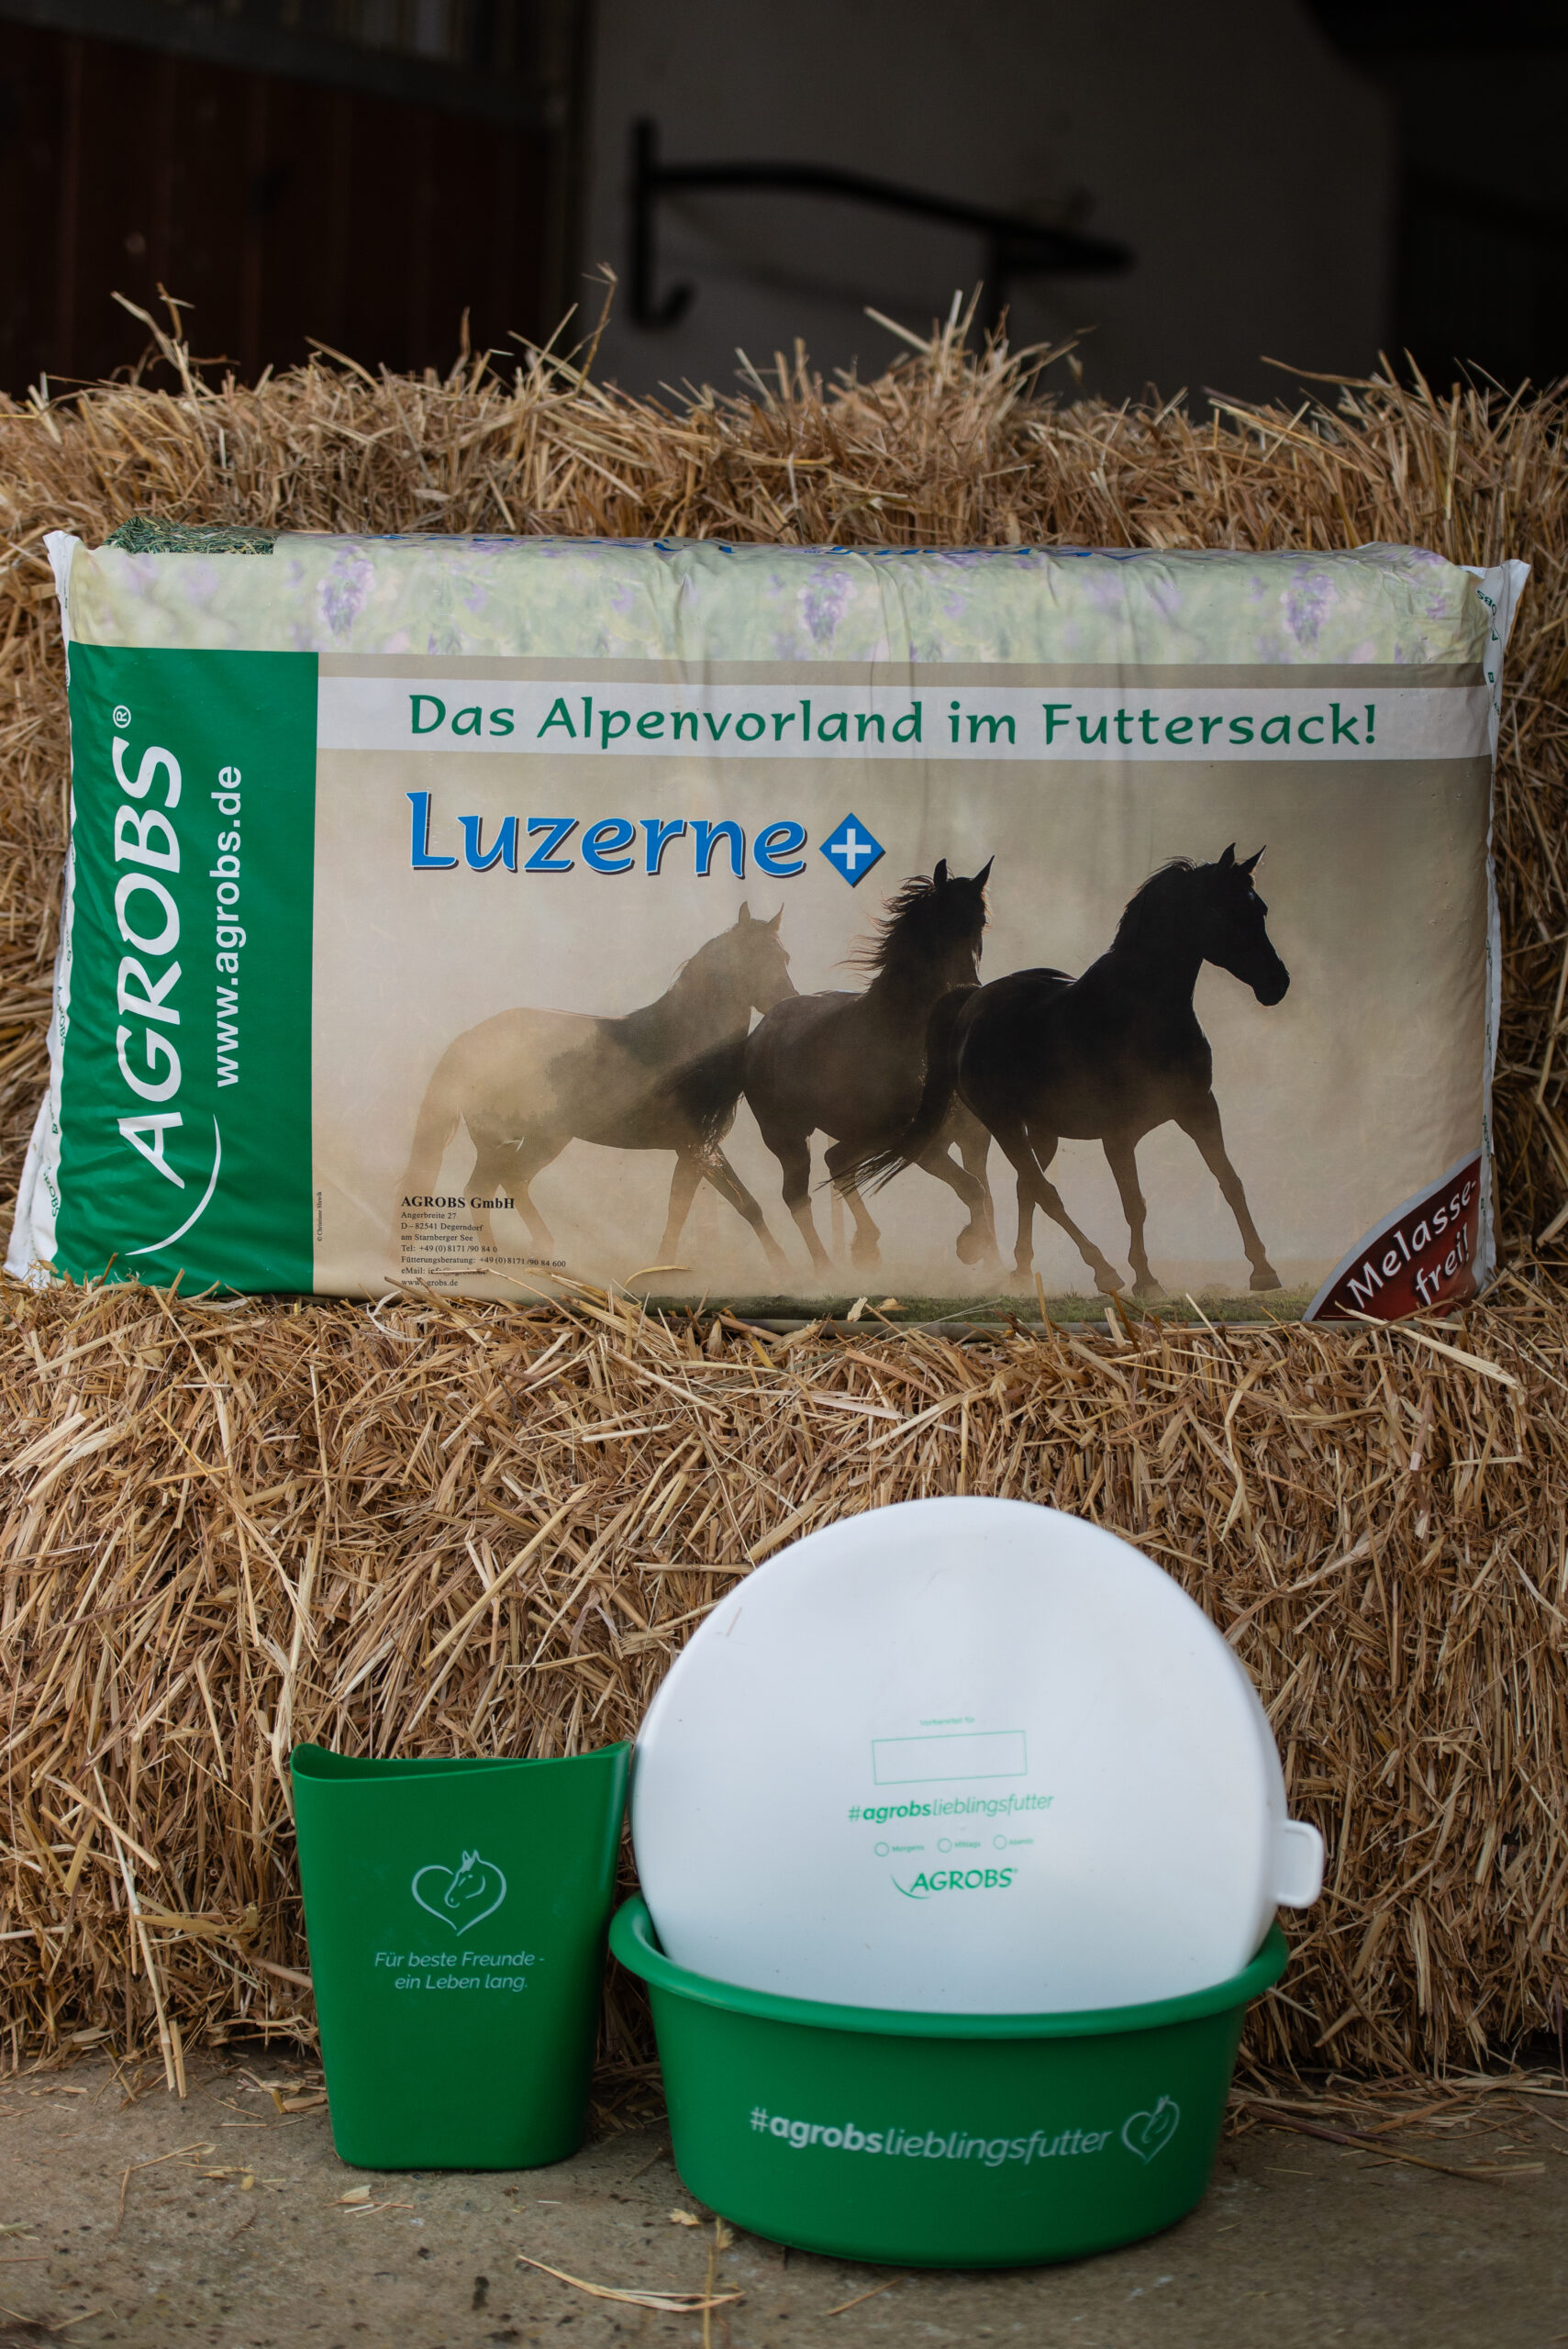 Product shot of a packaged bale of Agrobs Luzerne Plus